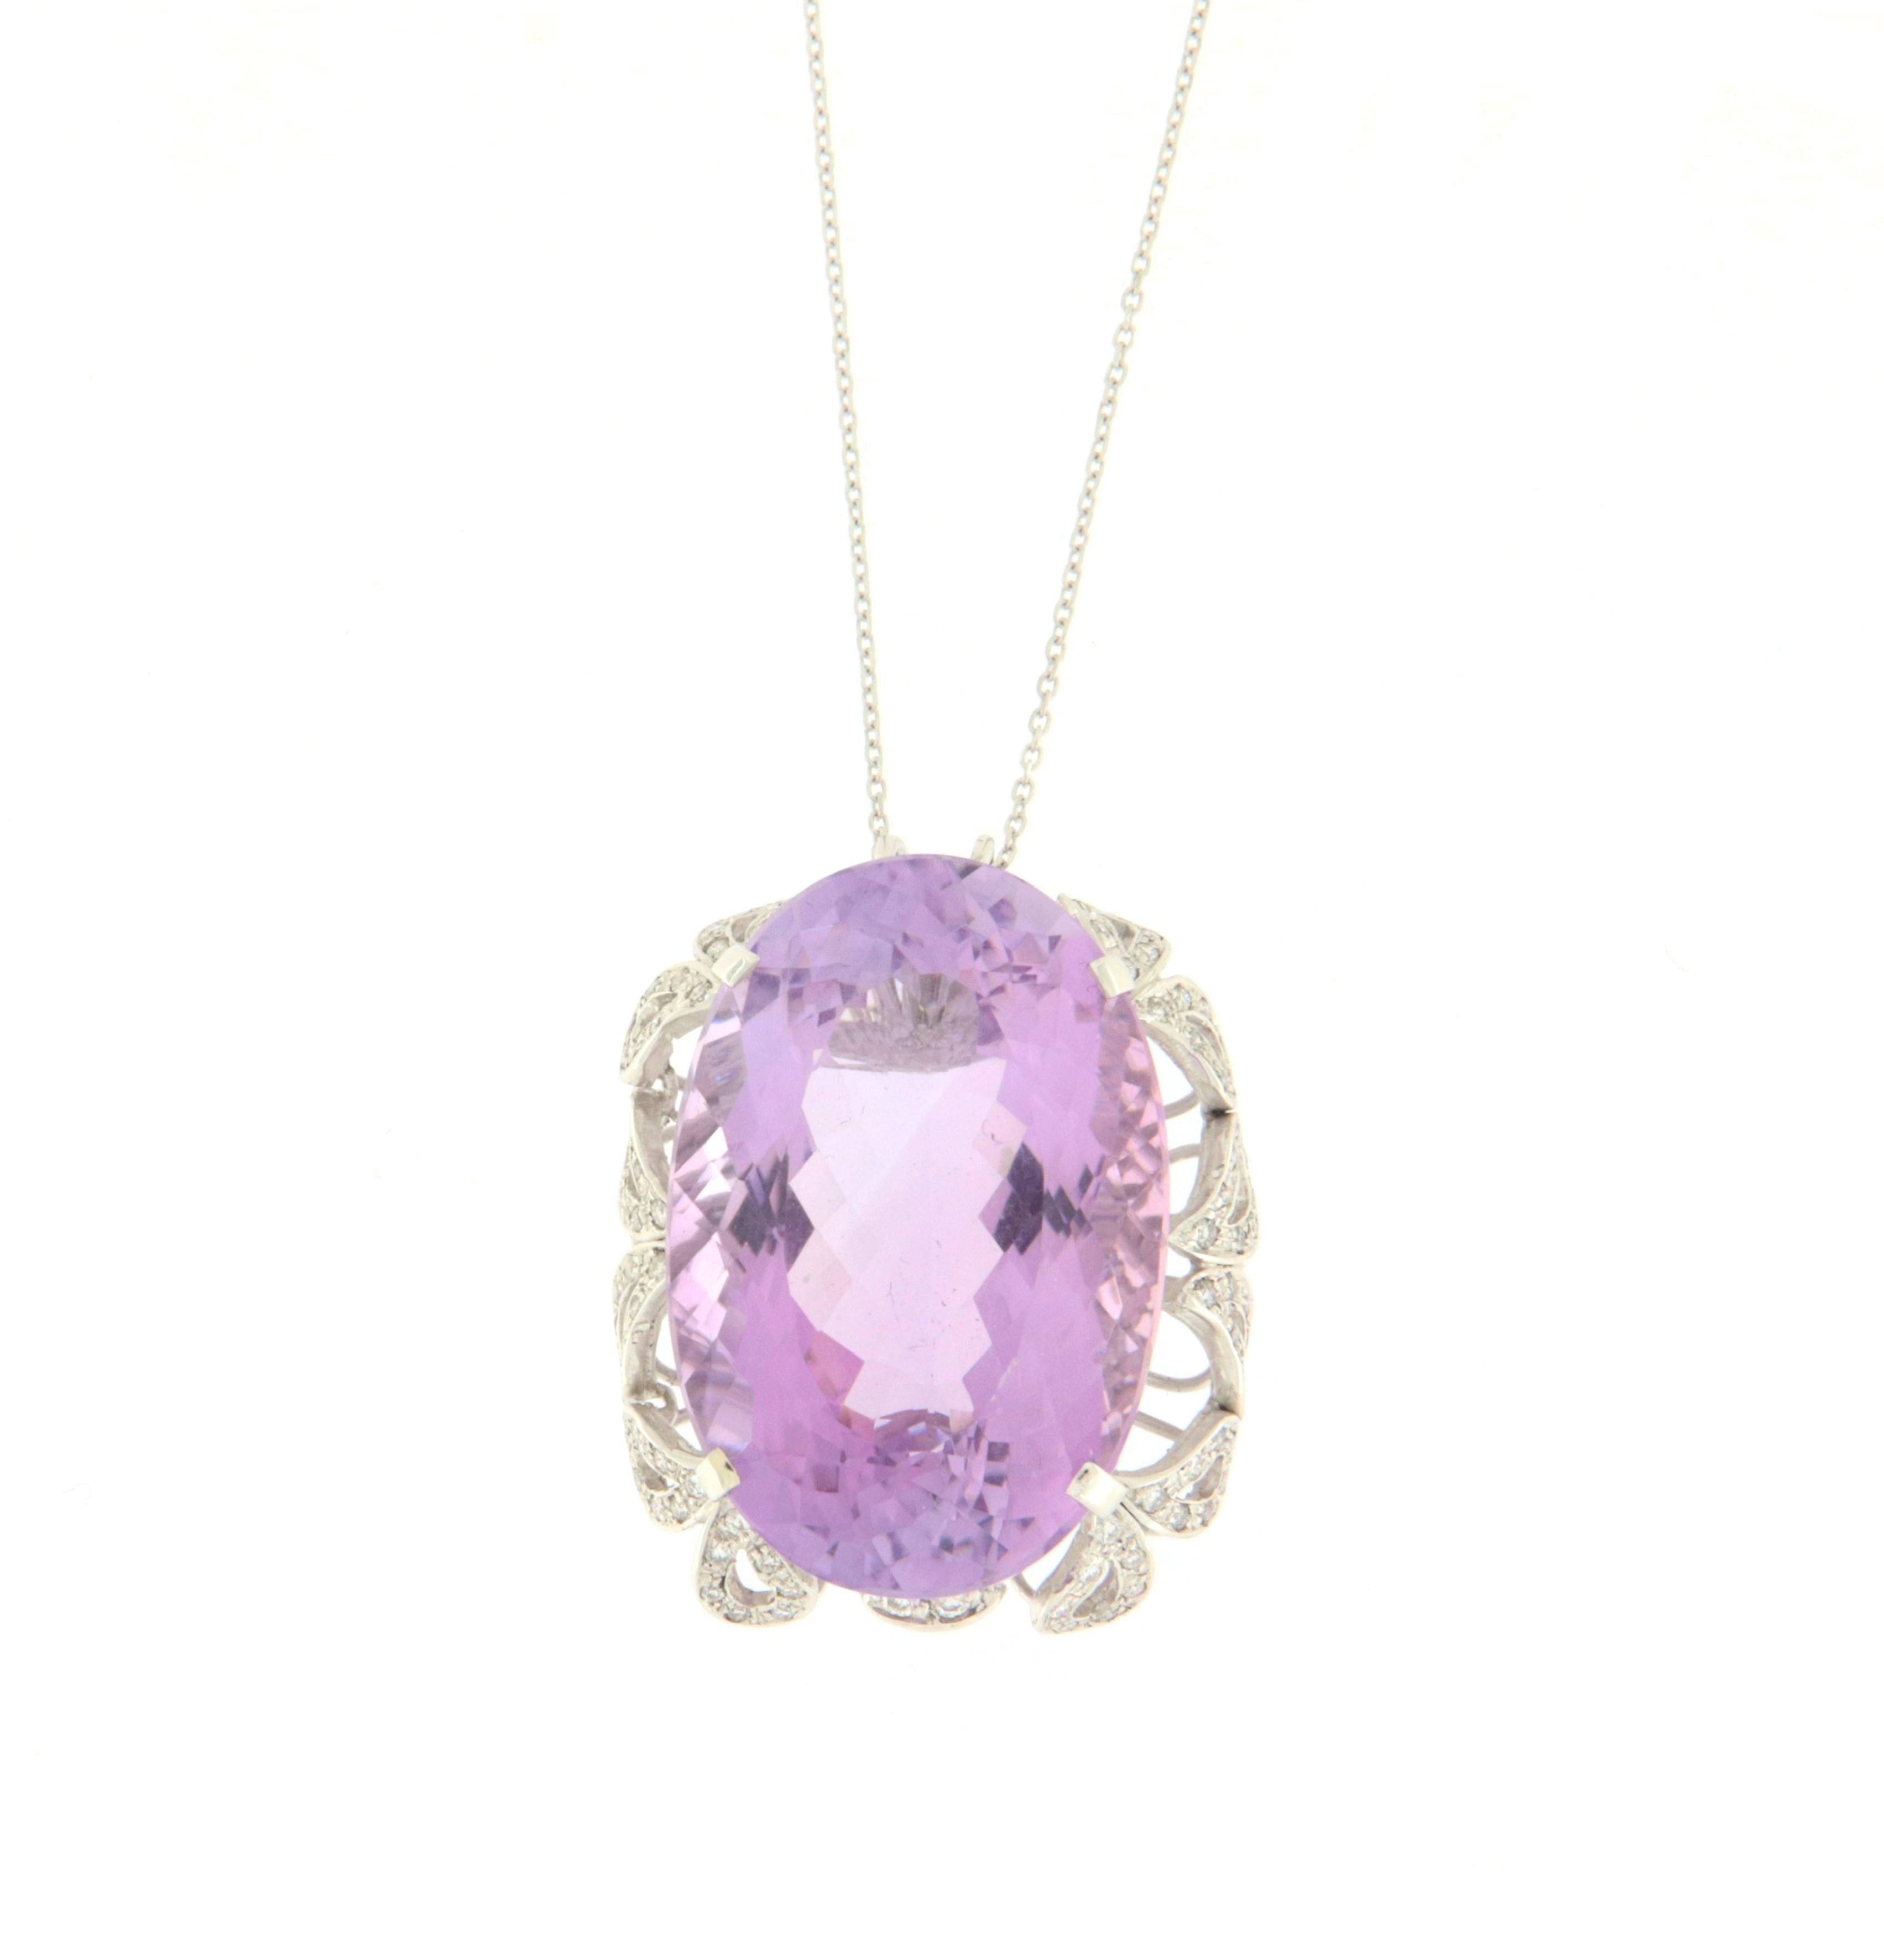 18 karat white gold pendant necklace. Handmade by our artisans assembled with amethyst and diamonds.

Pendant total weight 16.90 grams
Diamonds weight 1.40 karat
Amethyst weight 42.42 karat
Chain length 45 cm